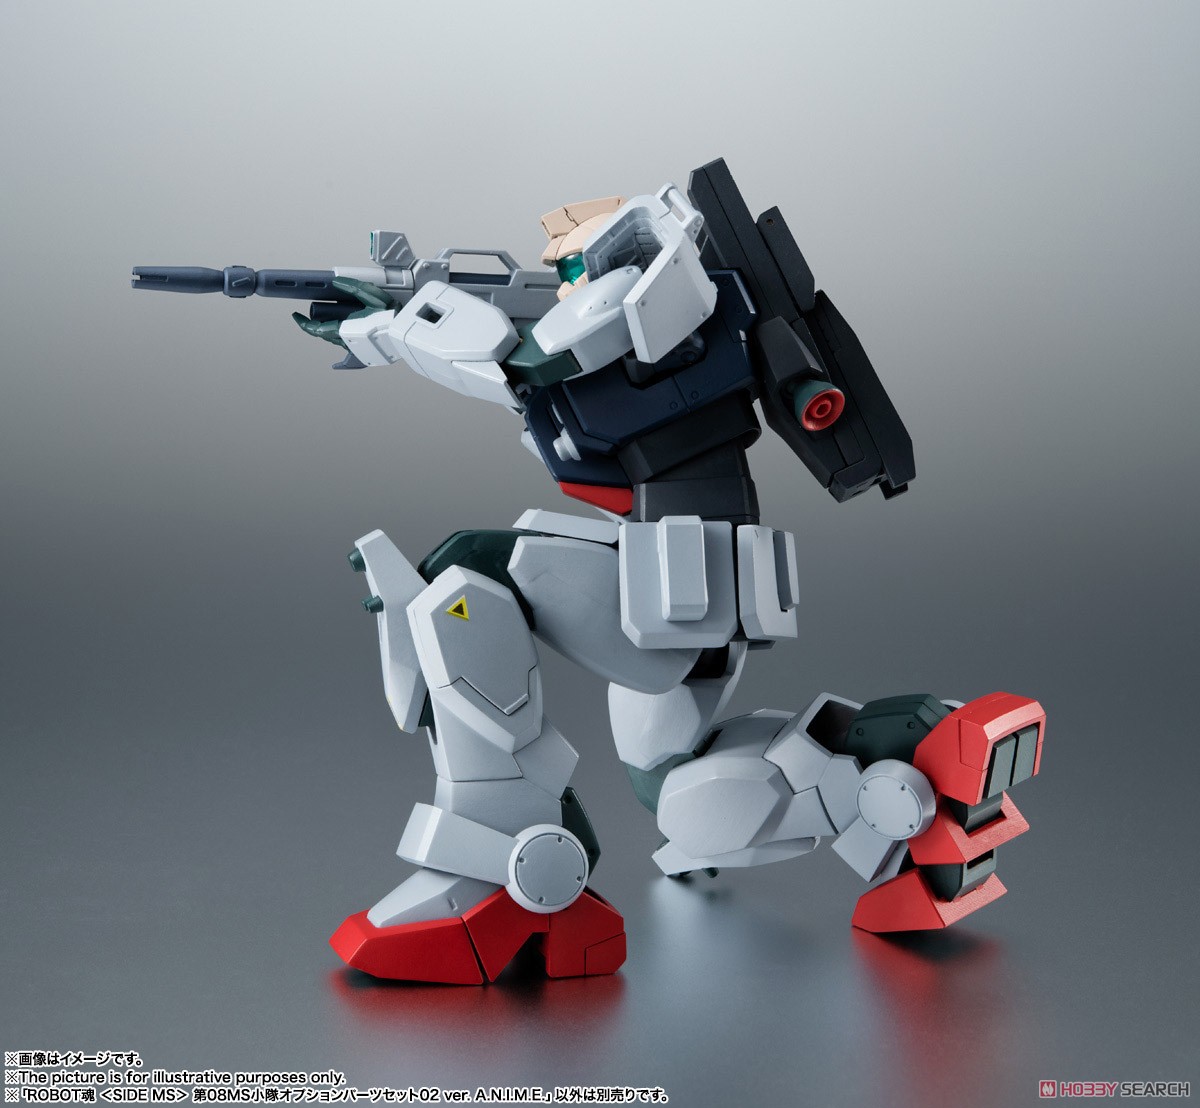 ROBOT魂 ＜ SIDE MS ＞ 第08MS小隊オプションパーツセット02 ver. A.N.I.M.E. (完成品) その他の画像4